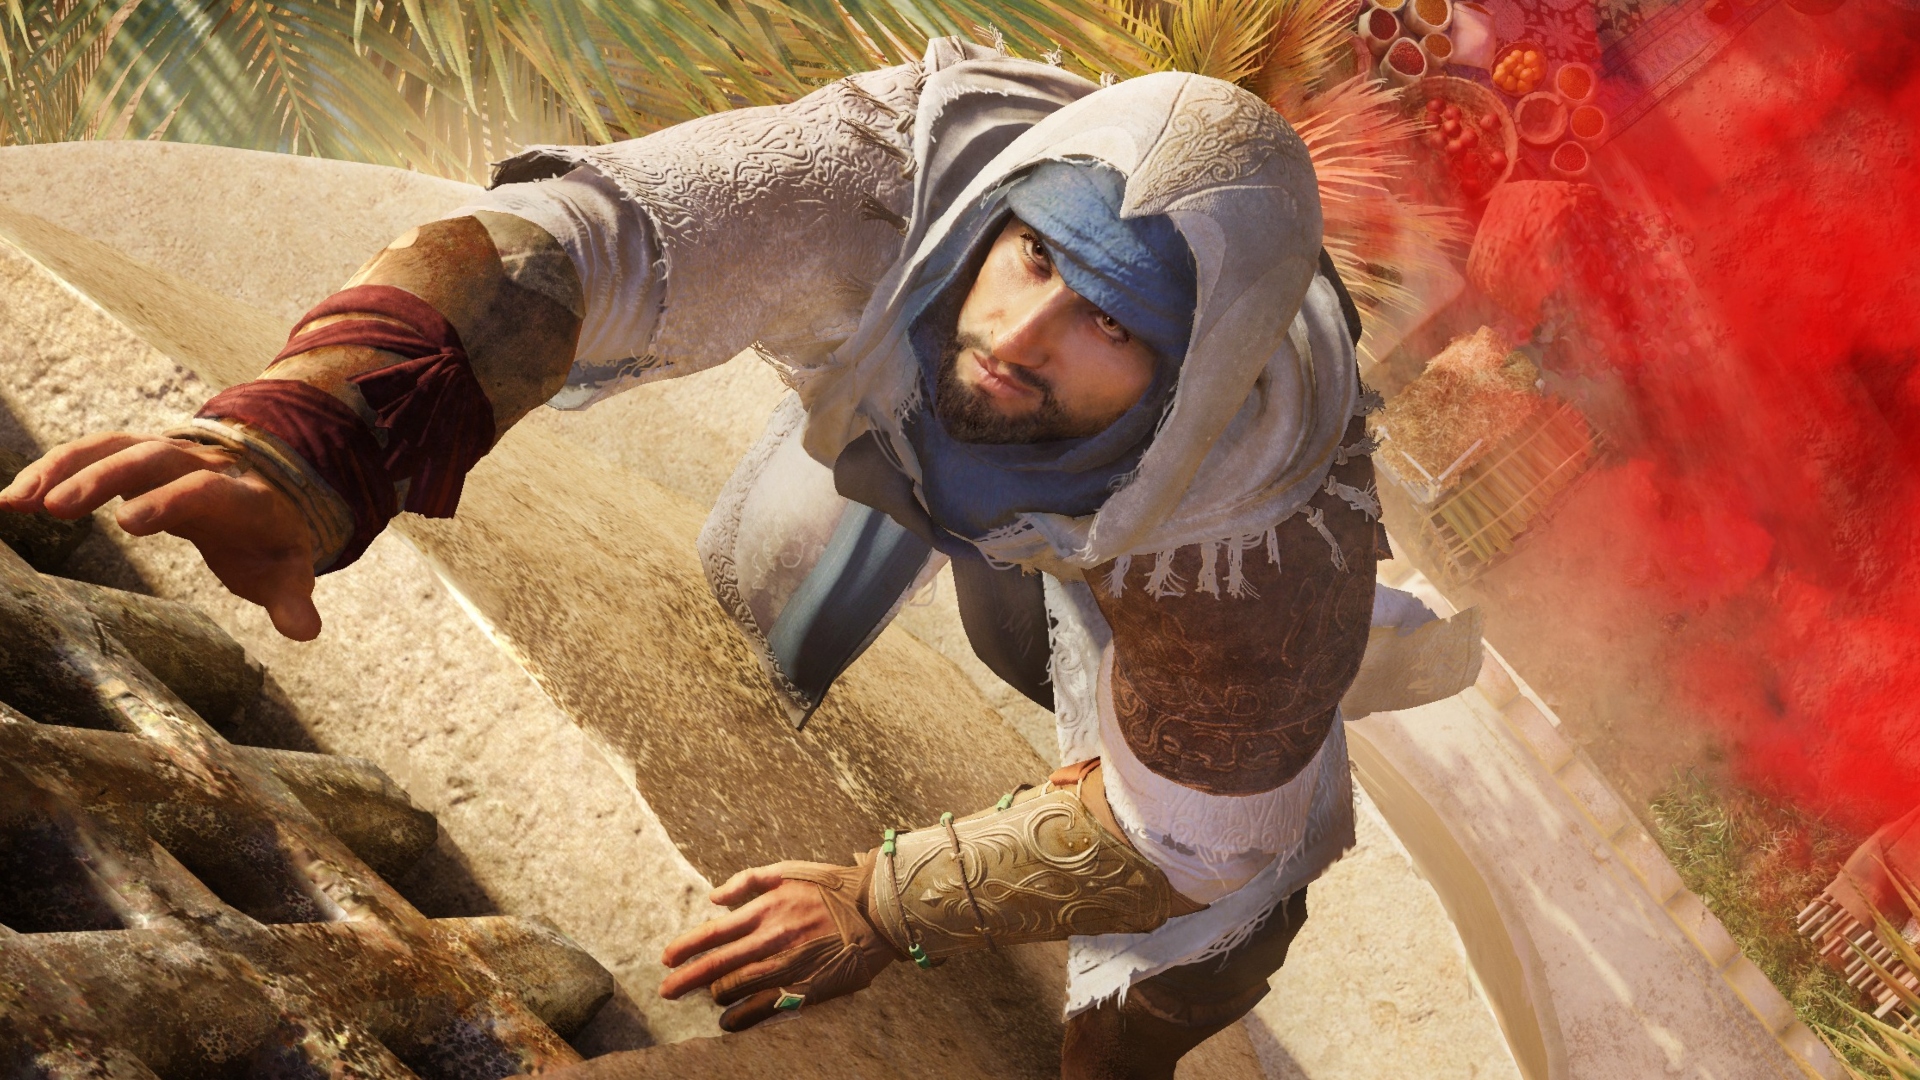 Assassin's Creed Mirage brings back a feature we've missed for years